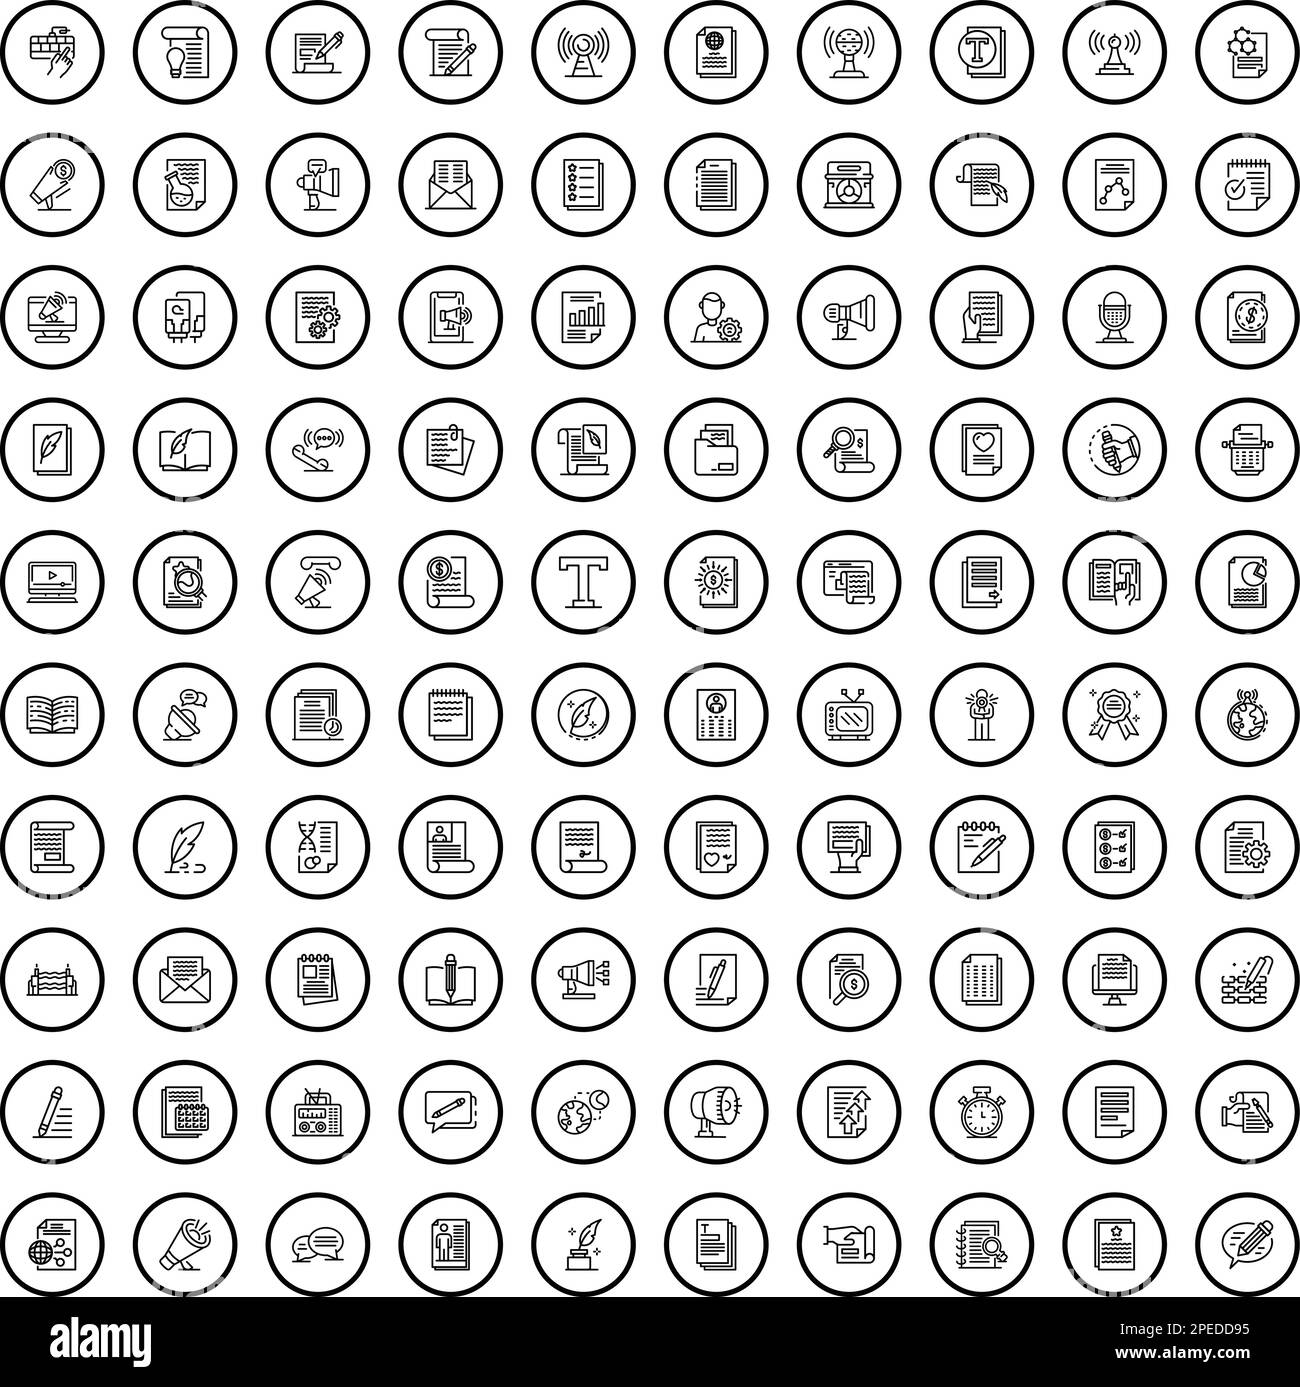 100 mass media icons set. Outline illustration of 100 mass media icons vector set isolated on white background Stock Vector